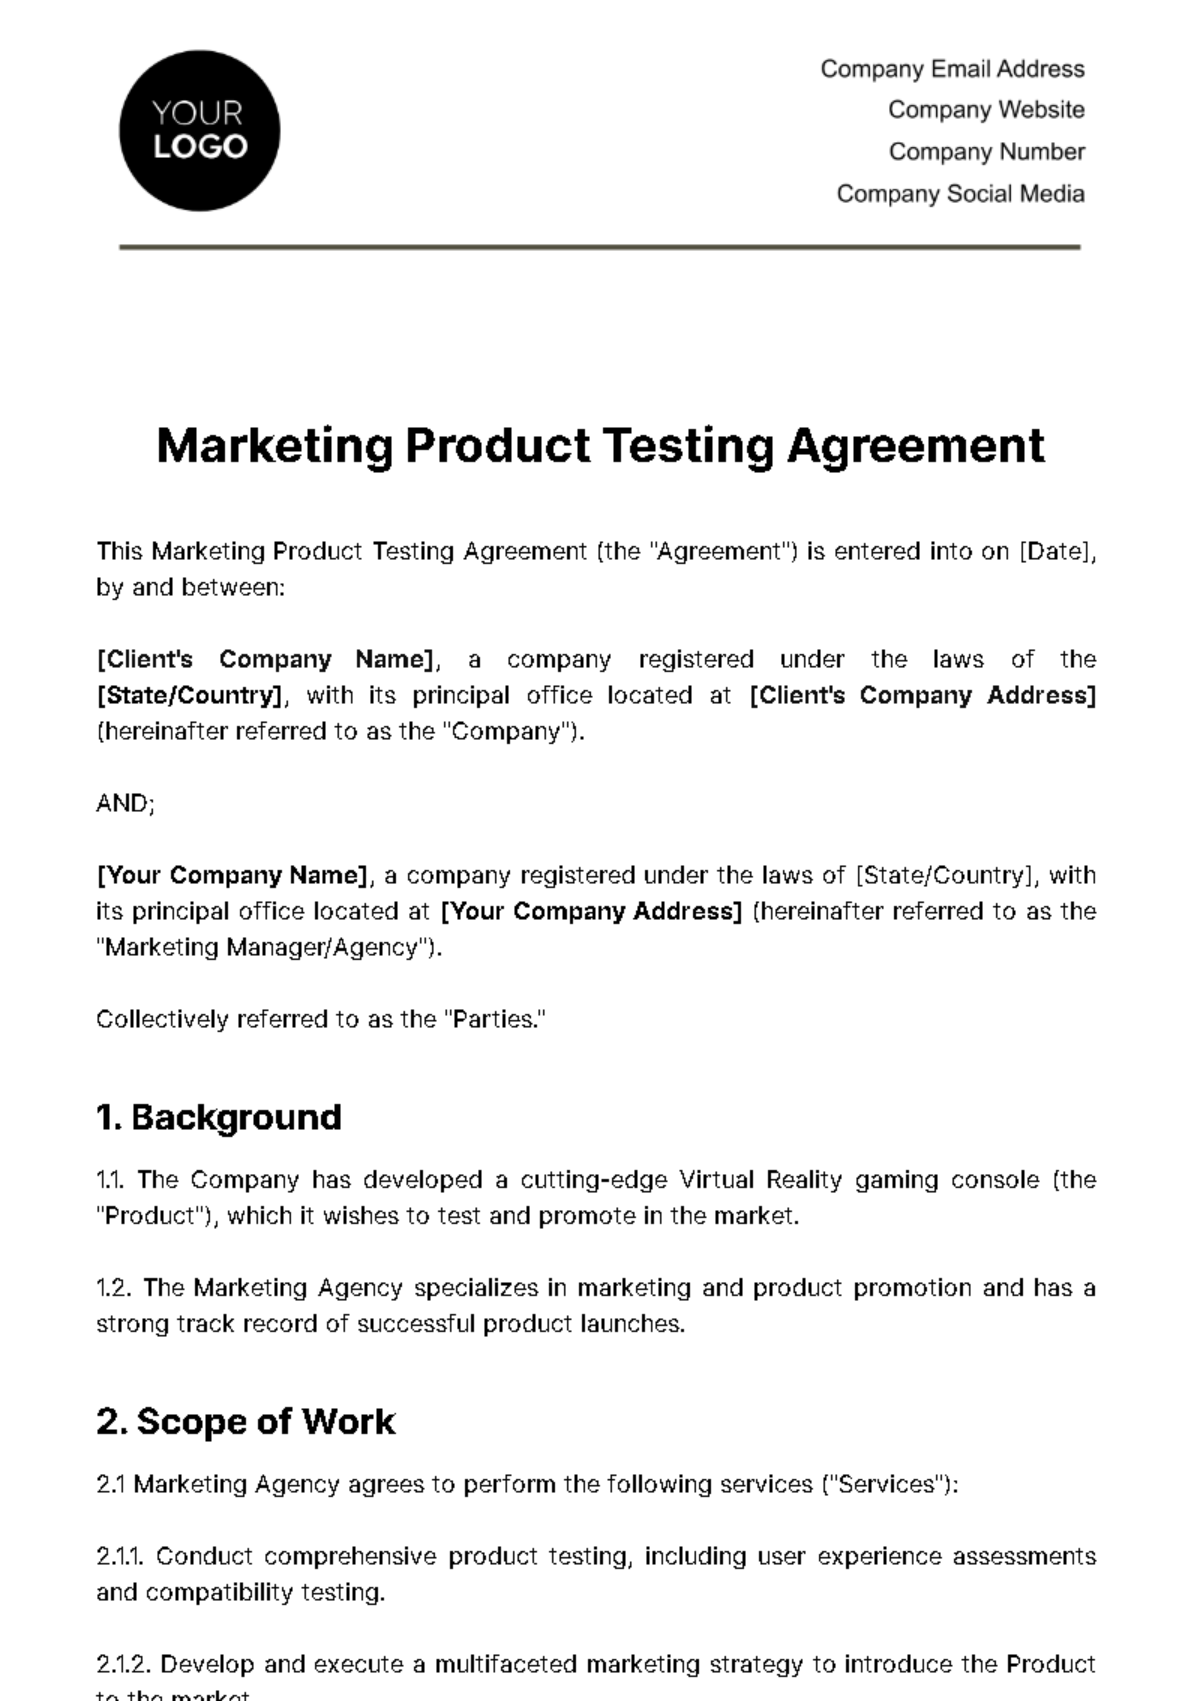 Marketing Product Testing Agreement Template